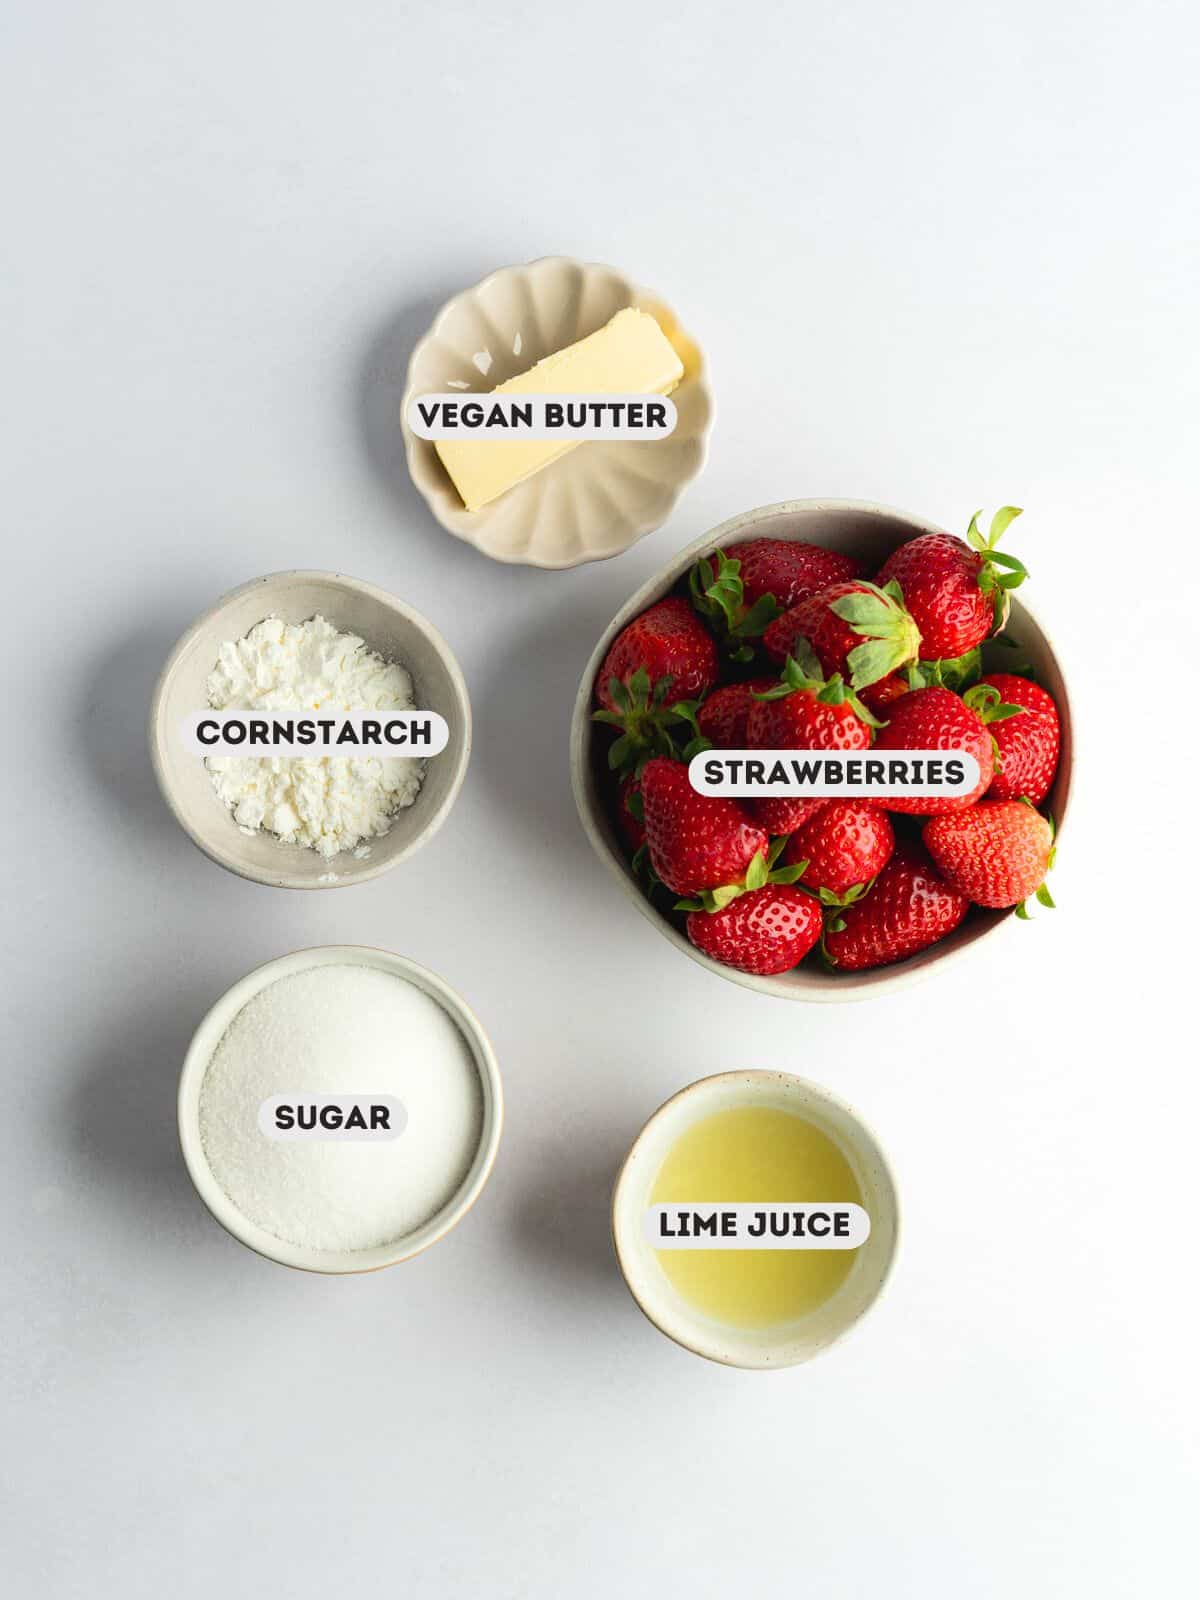 ingredients for strawberry curd measured out in bowls on a light gray surface with text overlay.